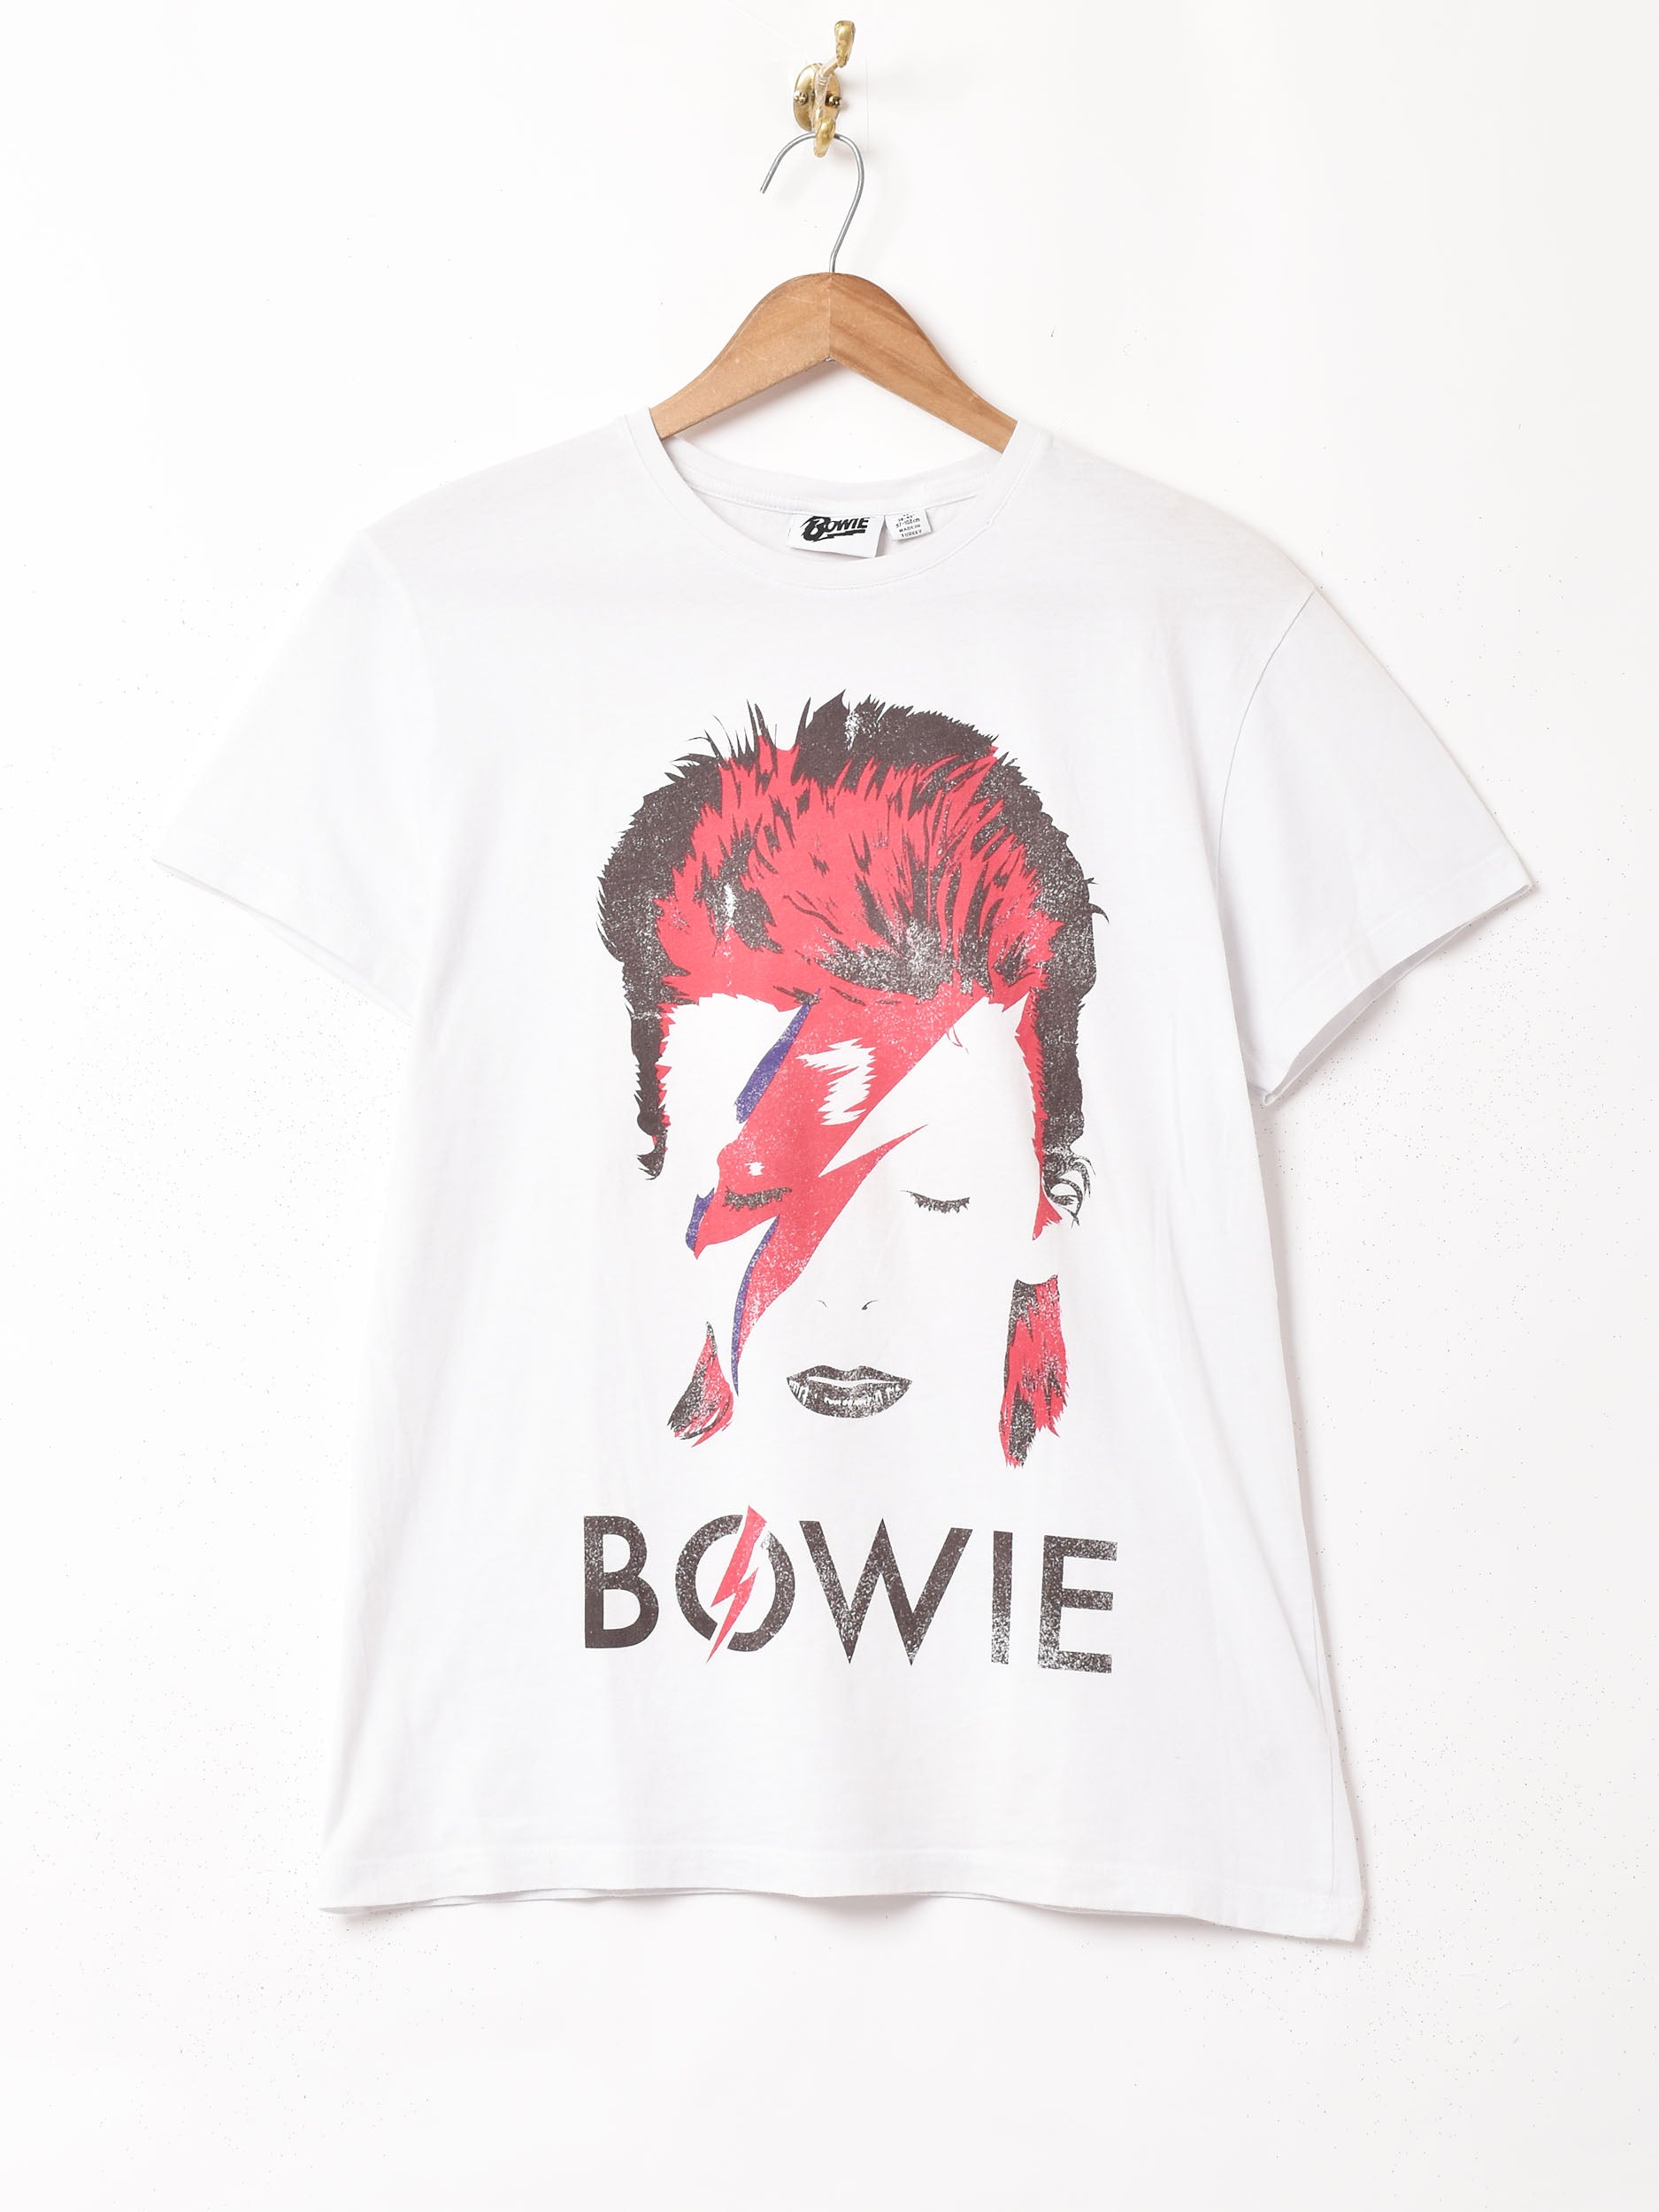 David Bowie プリントシャツ – 古着屋Top of the Hillのネット通販サイト